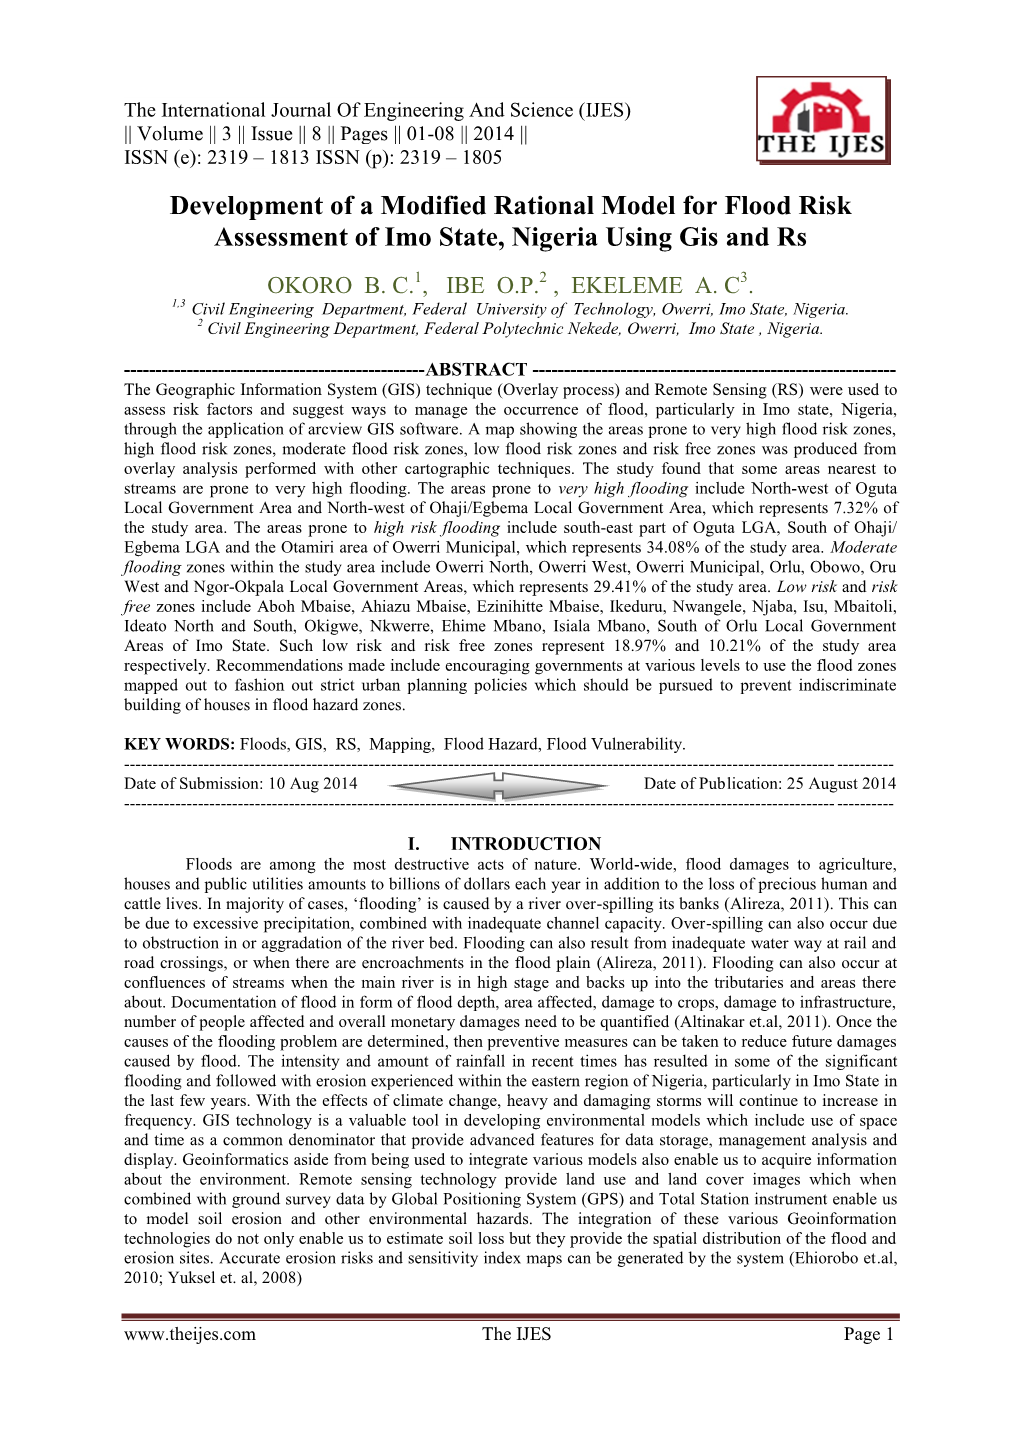 Development of a Modified Rational Model for Flood Risk Assessment of Imo State, Nigeria Using Gis and Rs